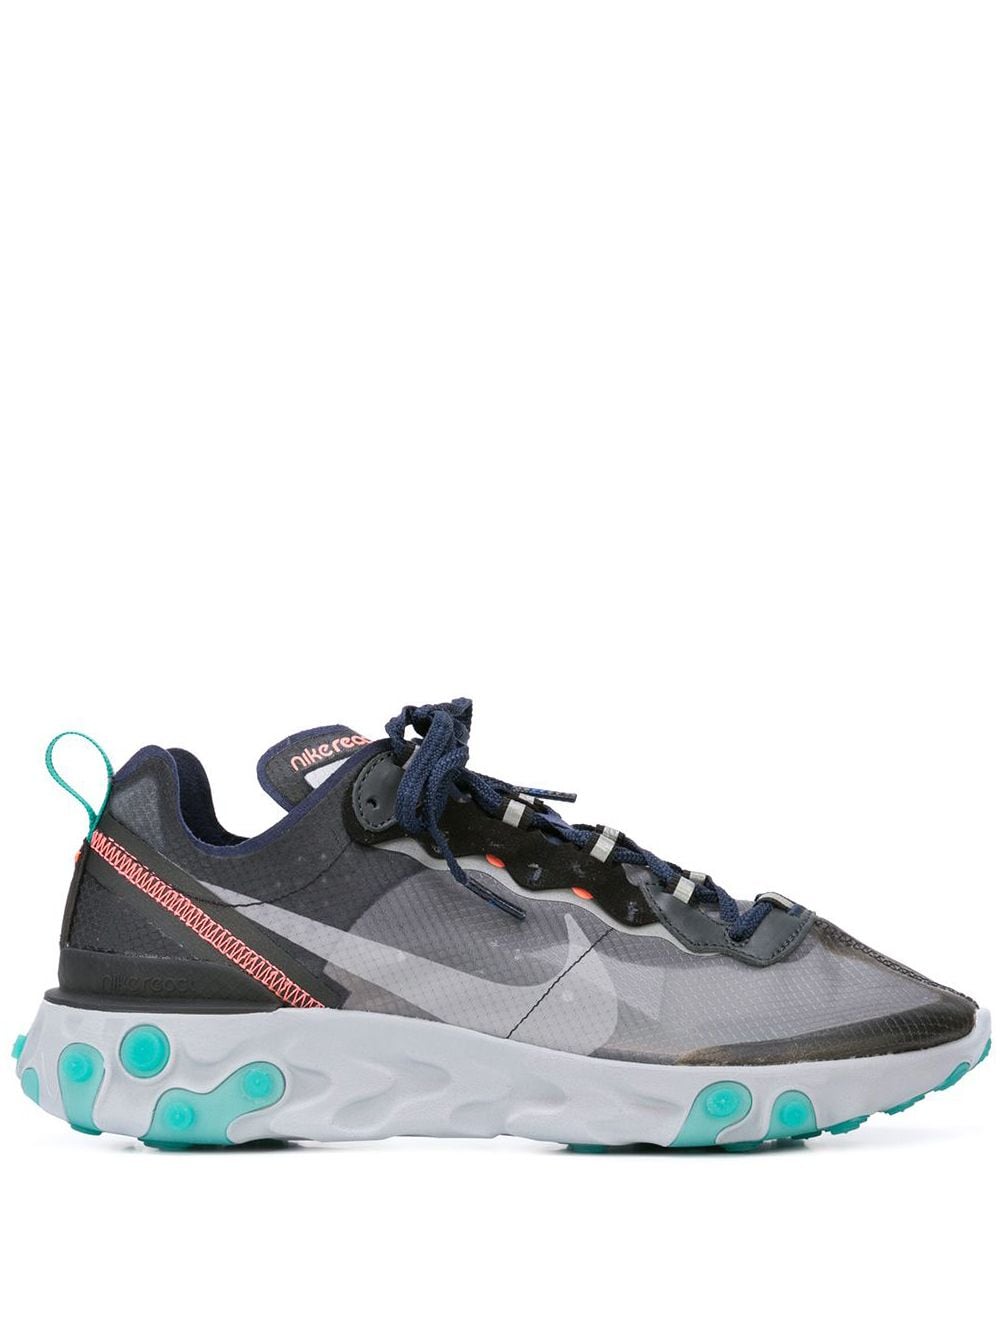 Shop Nike React Element 87 sneakers with Express Delivery - FARFETCH